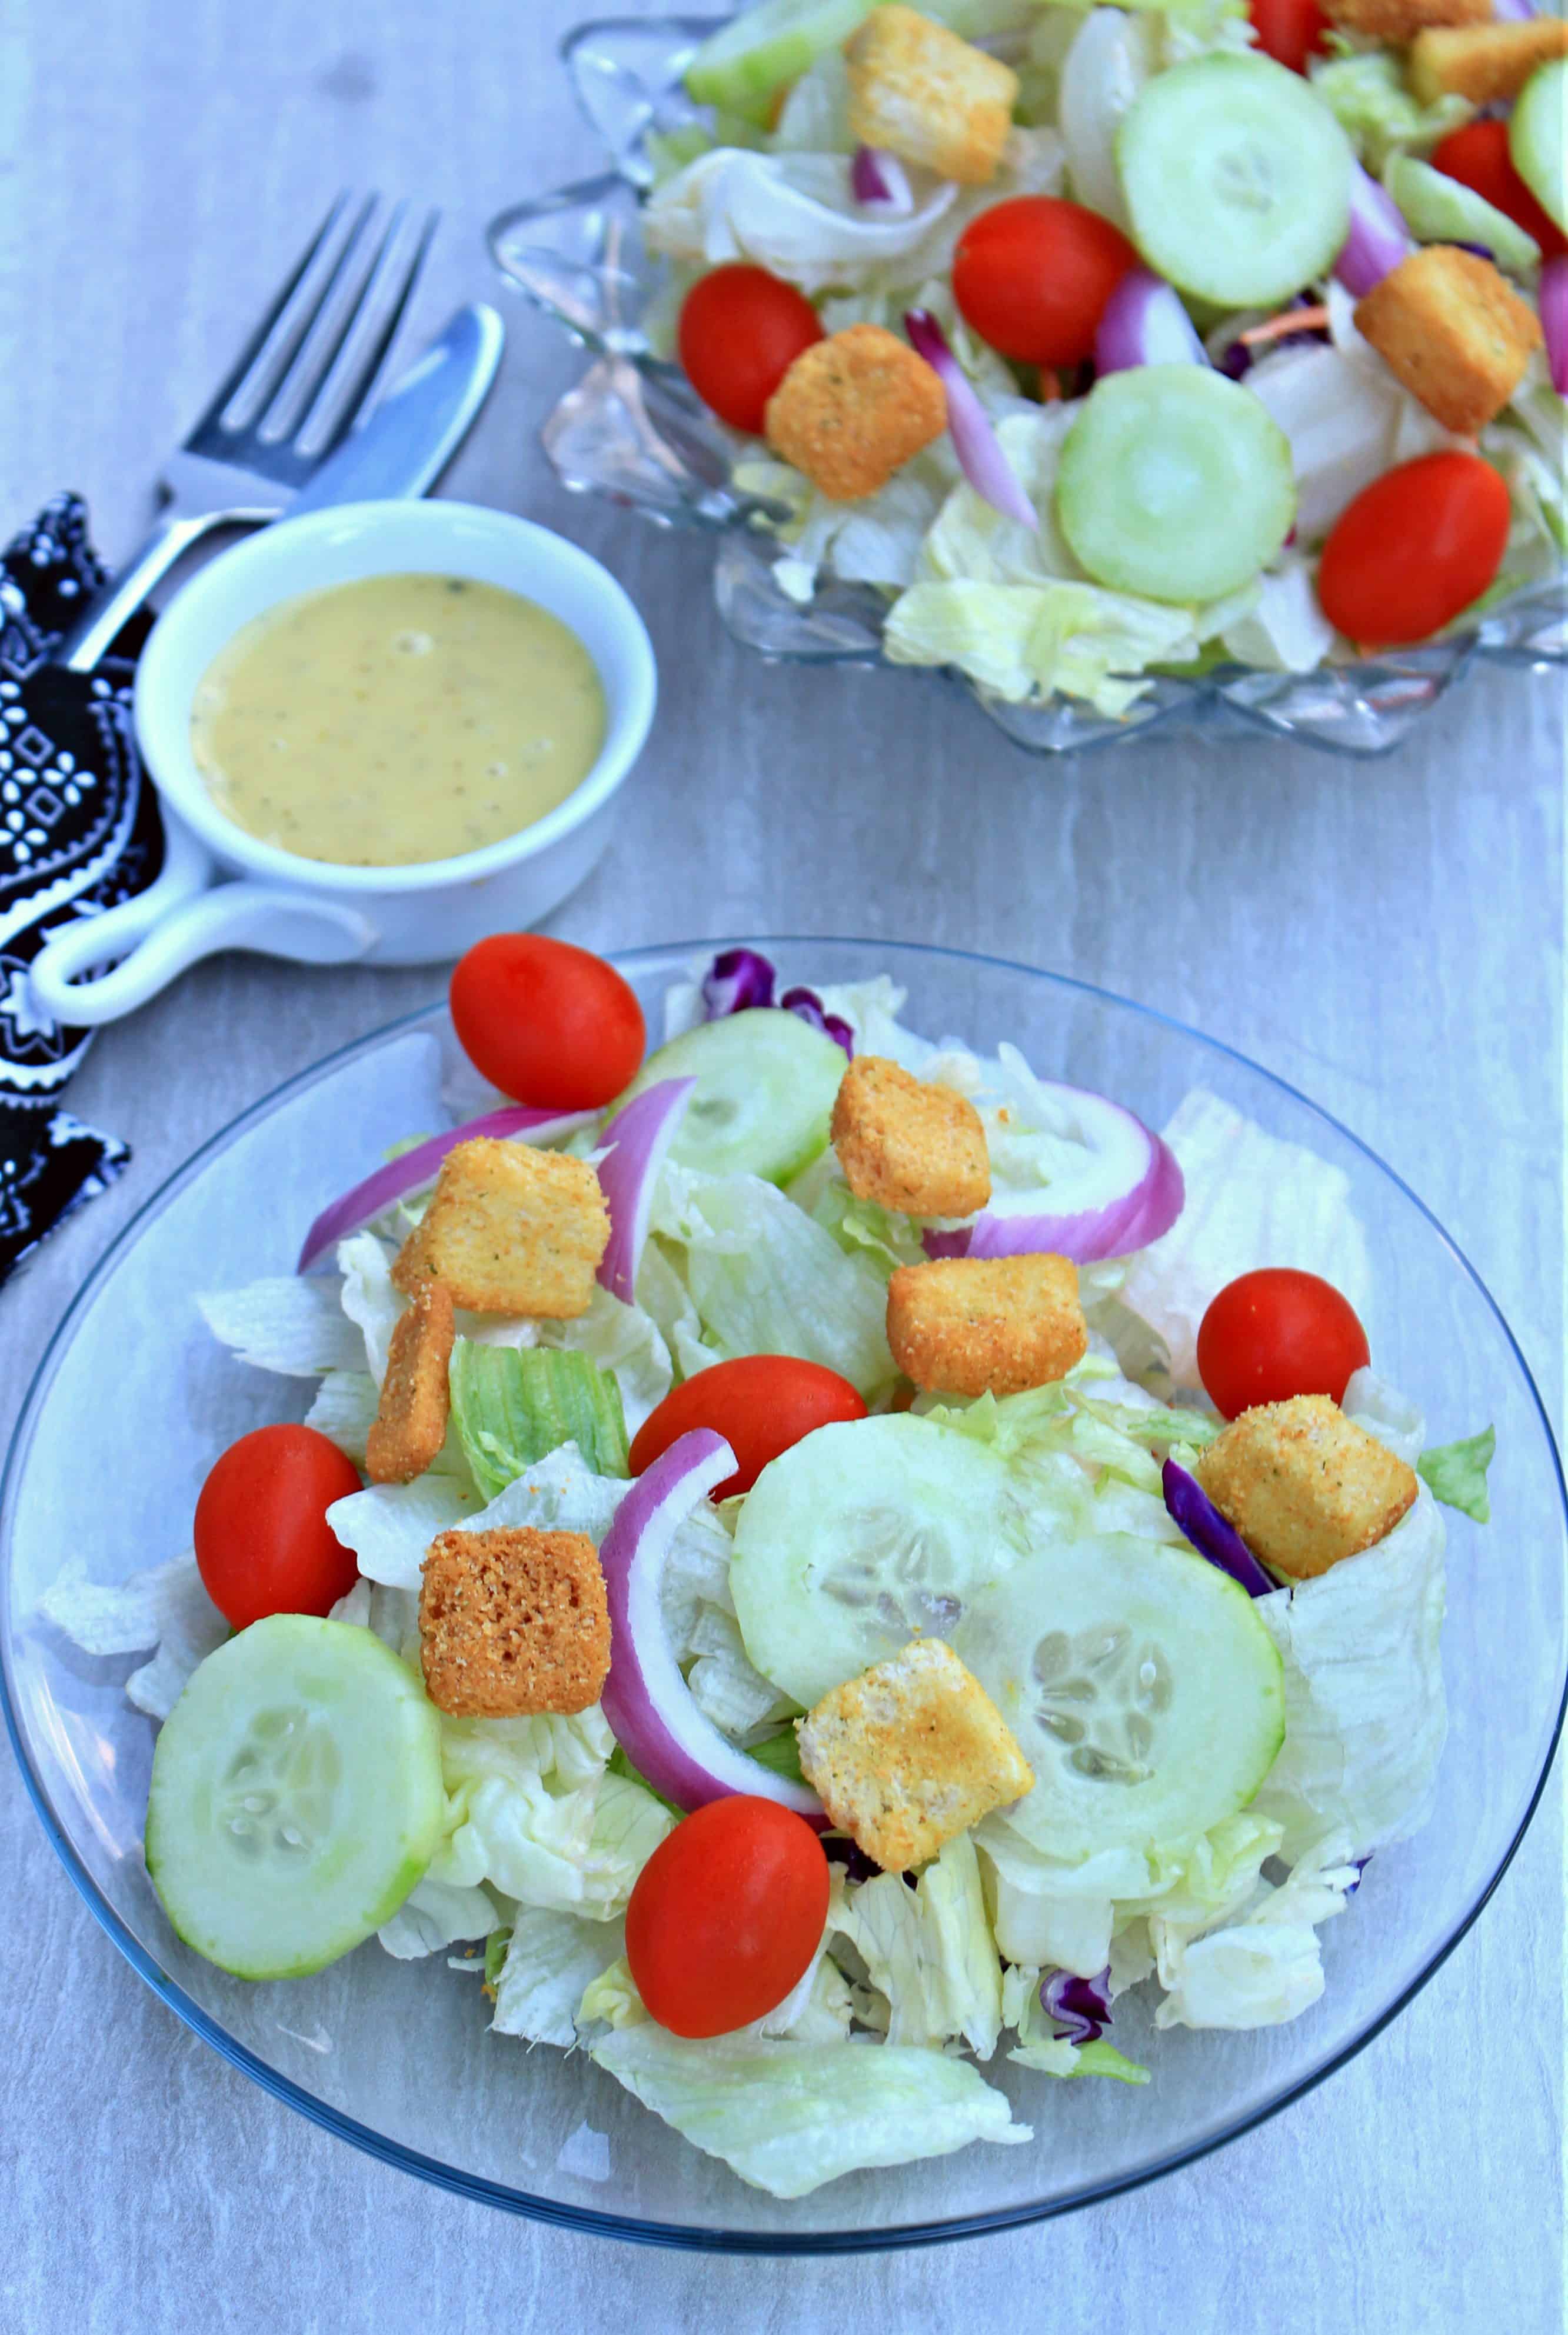 Simple Garden Salad is ready to eat.